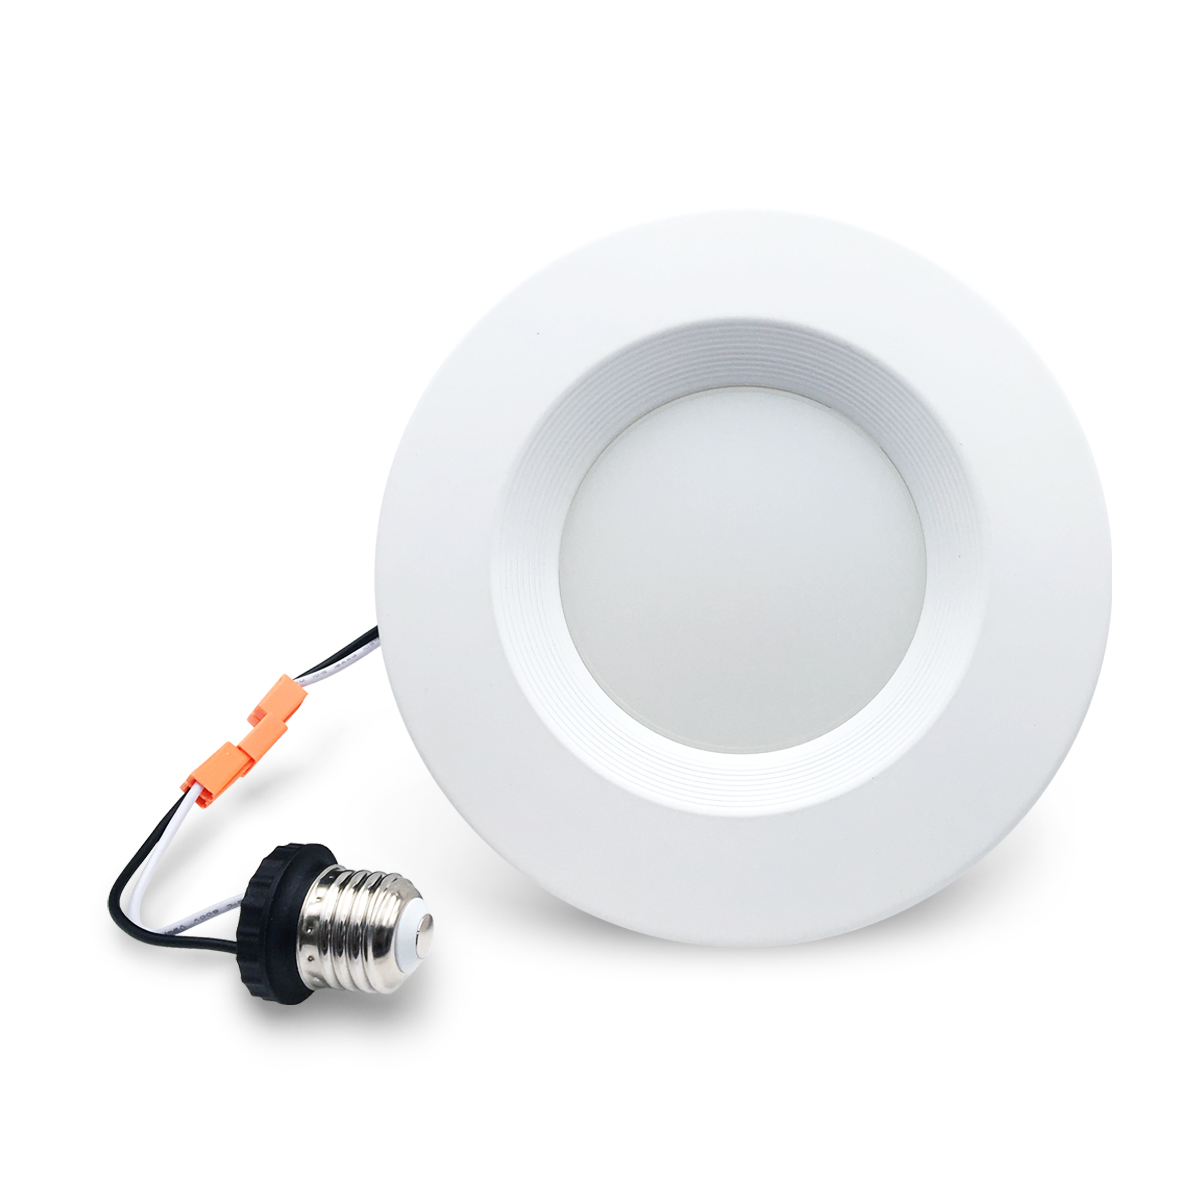 Homestar 6inch 12W Round 3CCT Retrofit Downlight with ETL and ES Certification